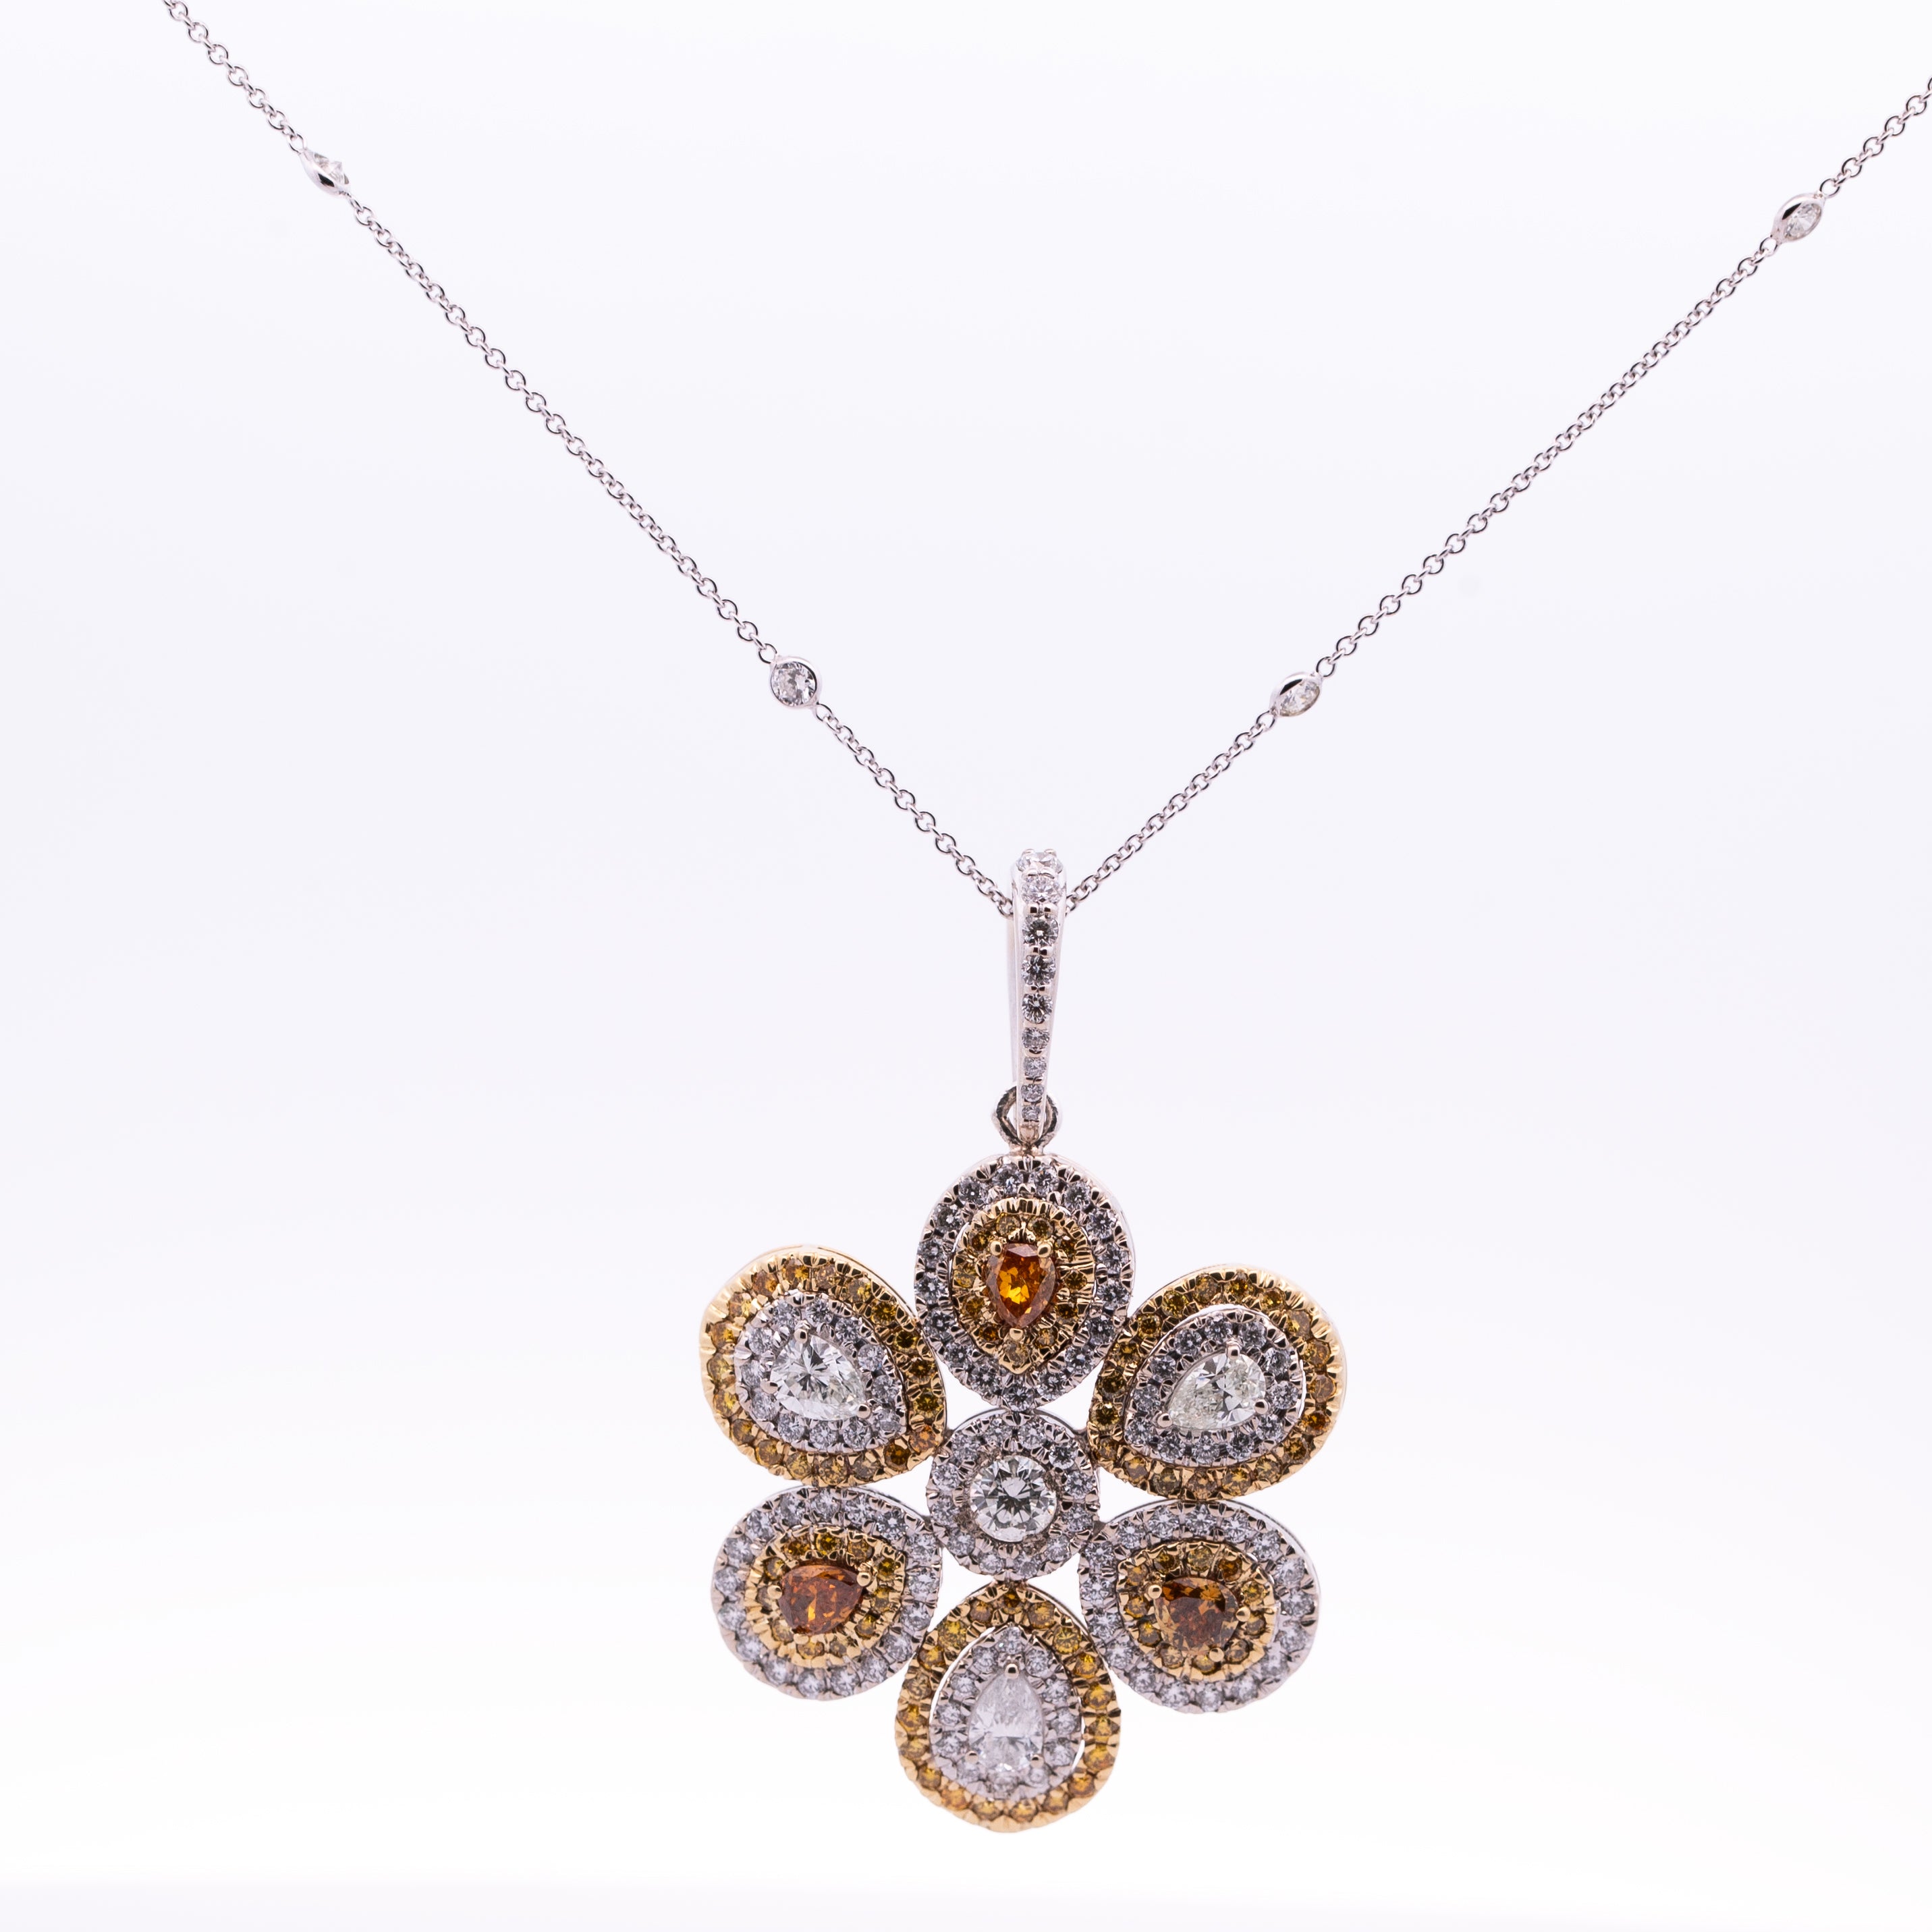 Inspired Diamond Necklace - Colored Stone Necklace